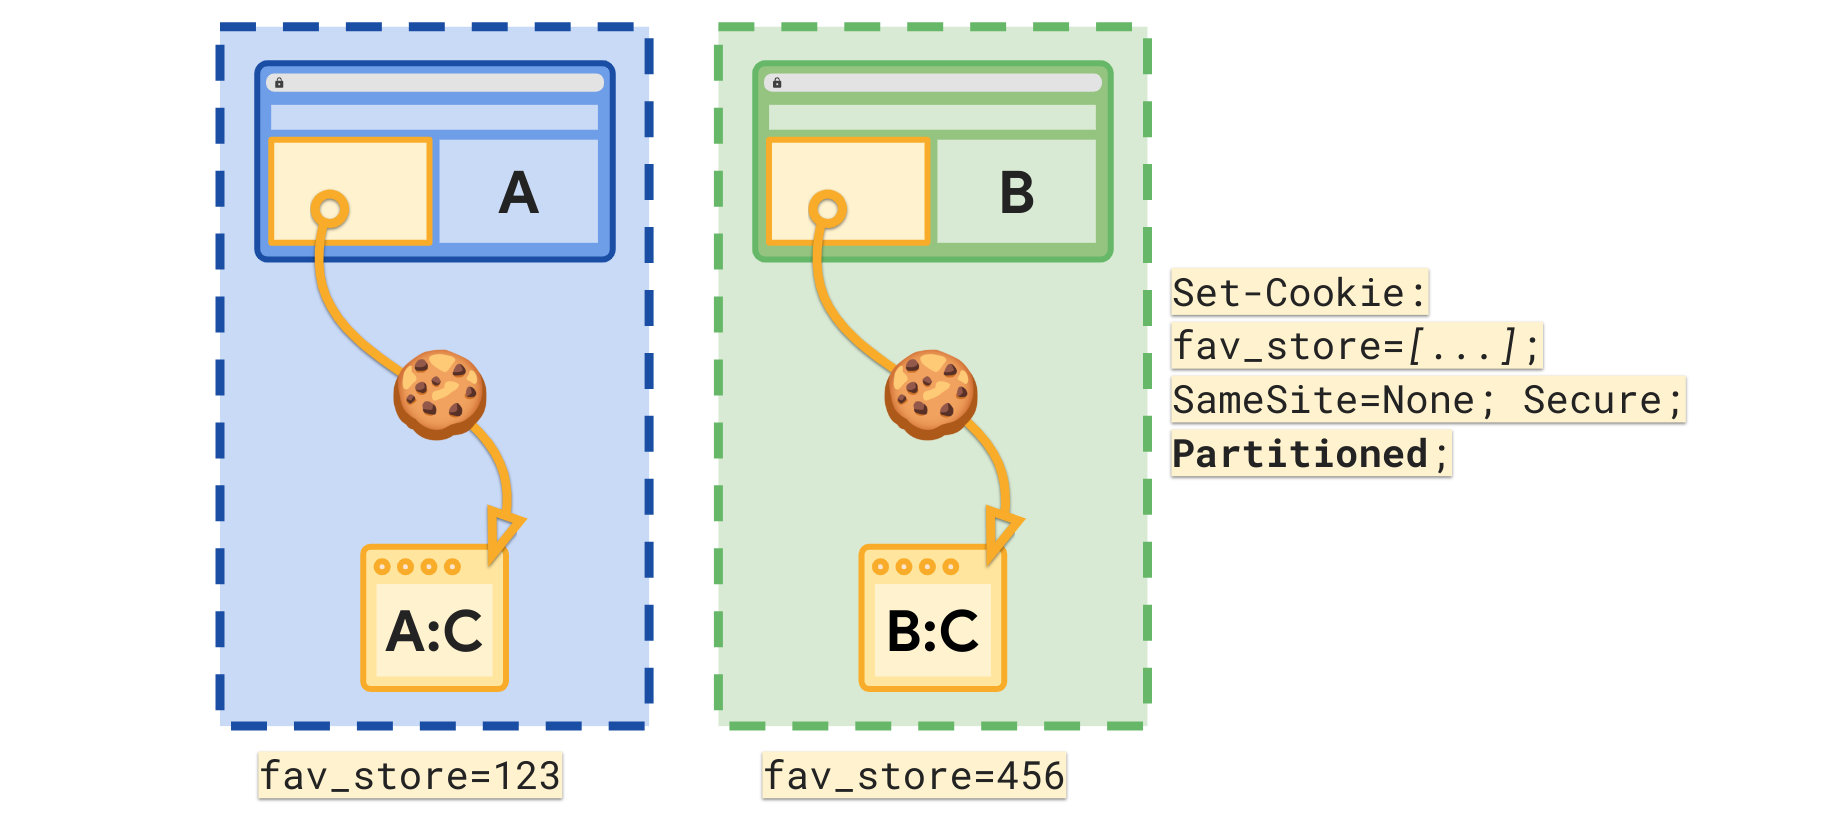 The Partitioned attribute enables a seperate fav_store cookie to be set per top-level site.